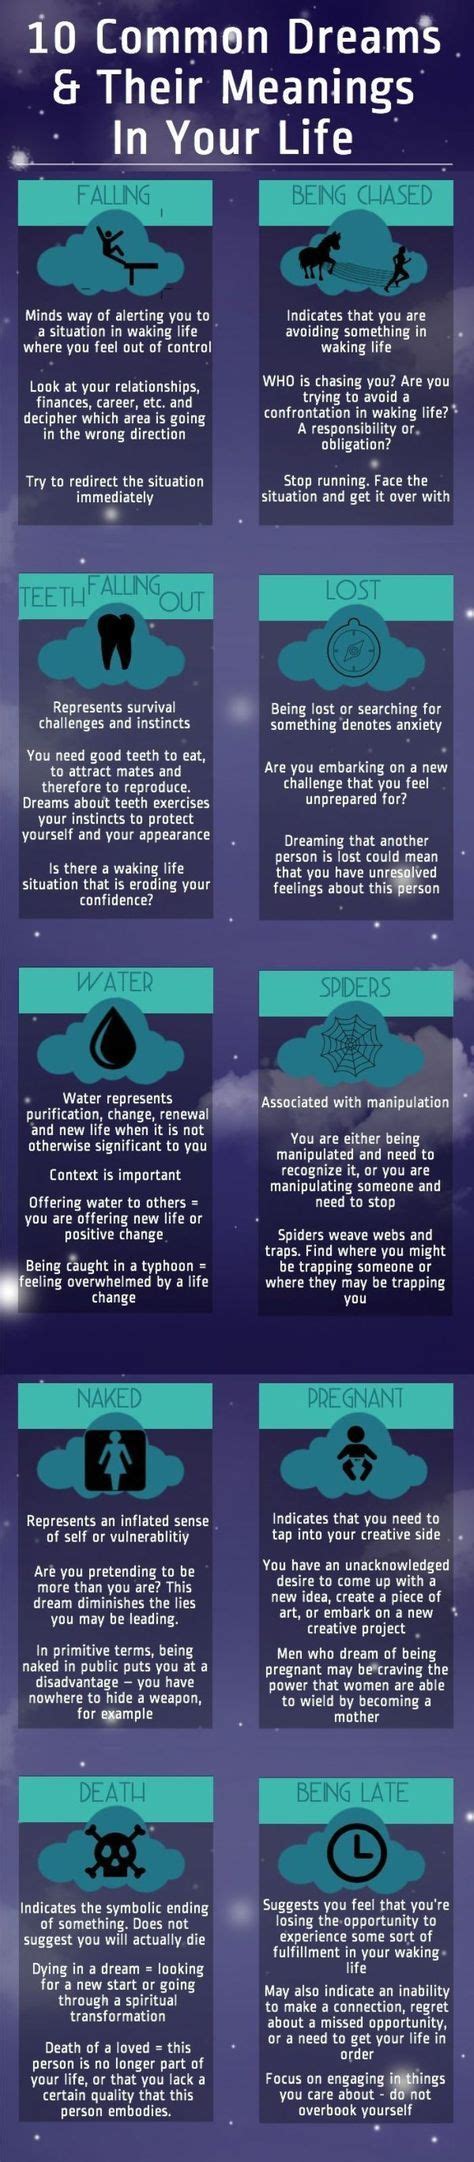 10 Common Dream Meanings Dream Meanings What Your Dreams Mean